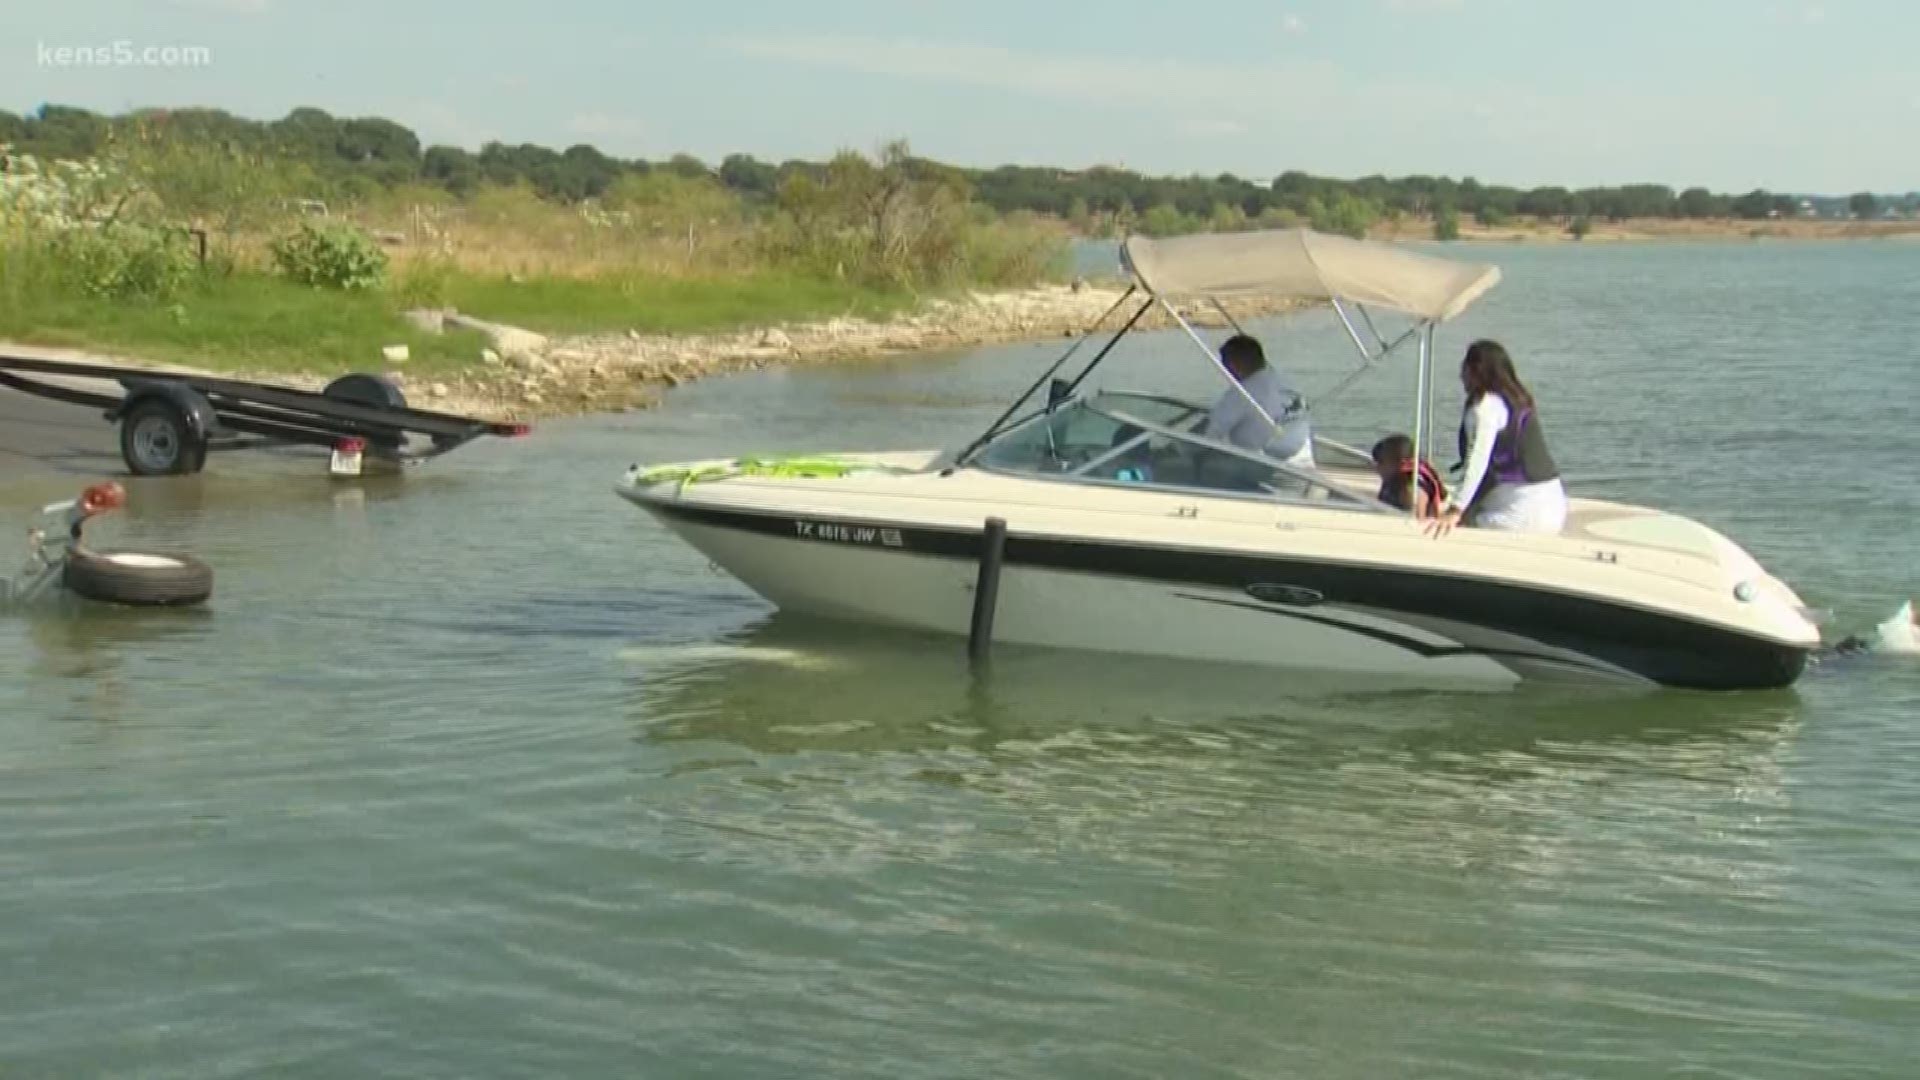 A new Texas law aims to save lives by requiring a lanyard to be attached to the kill switch in some boats.